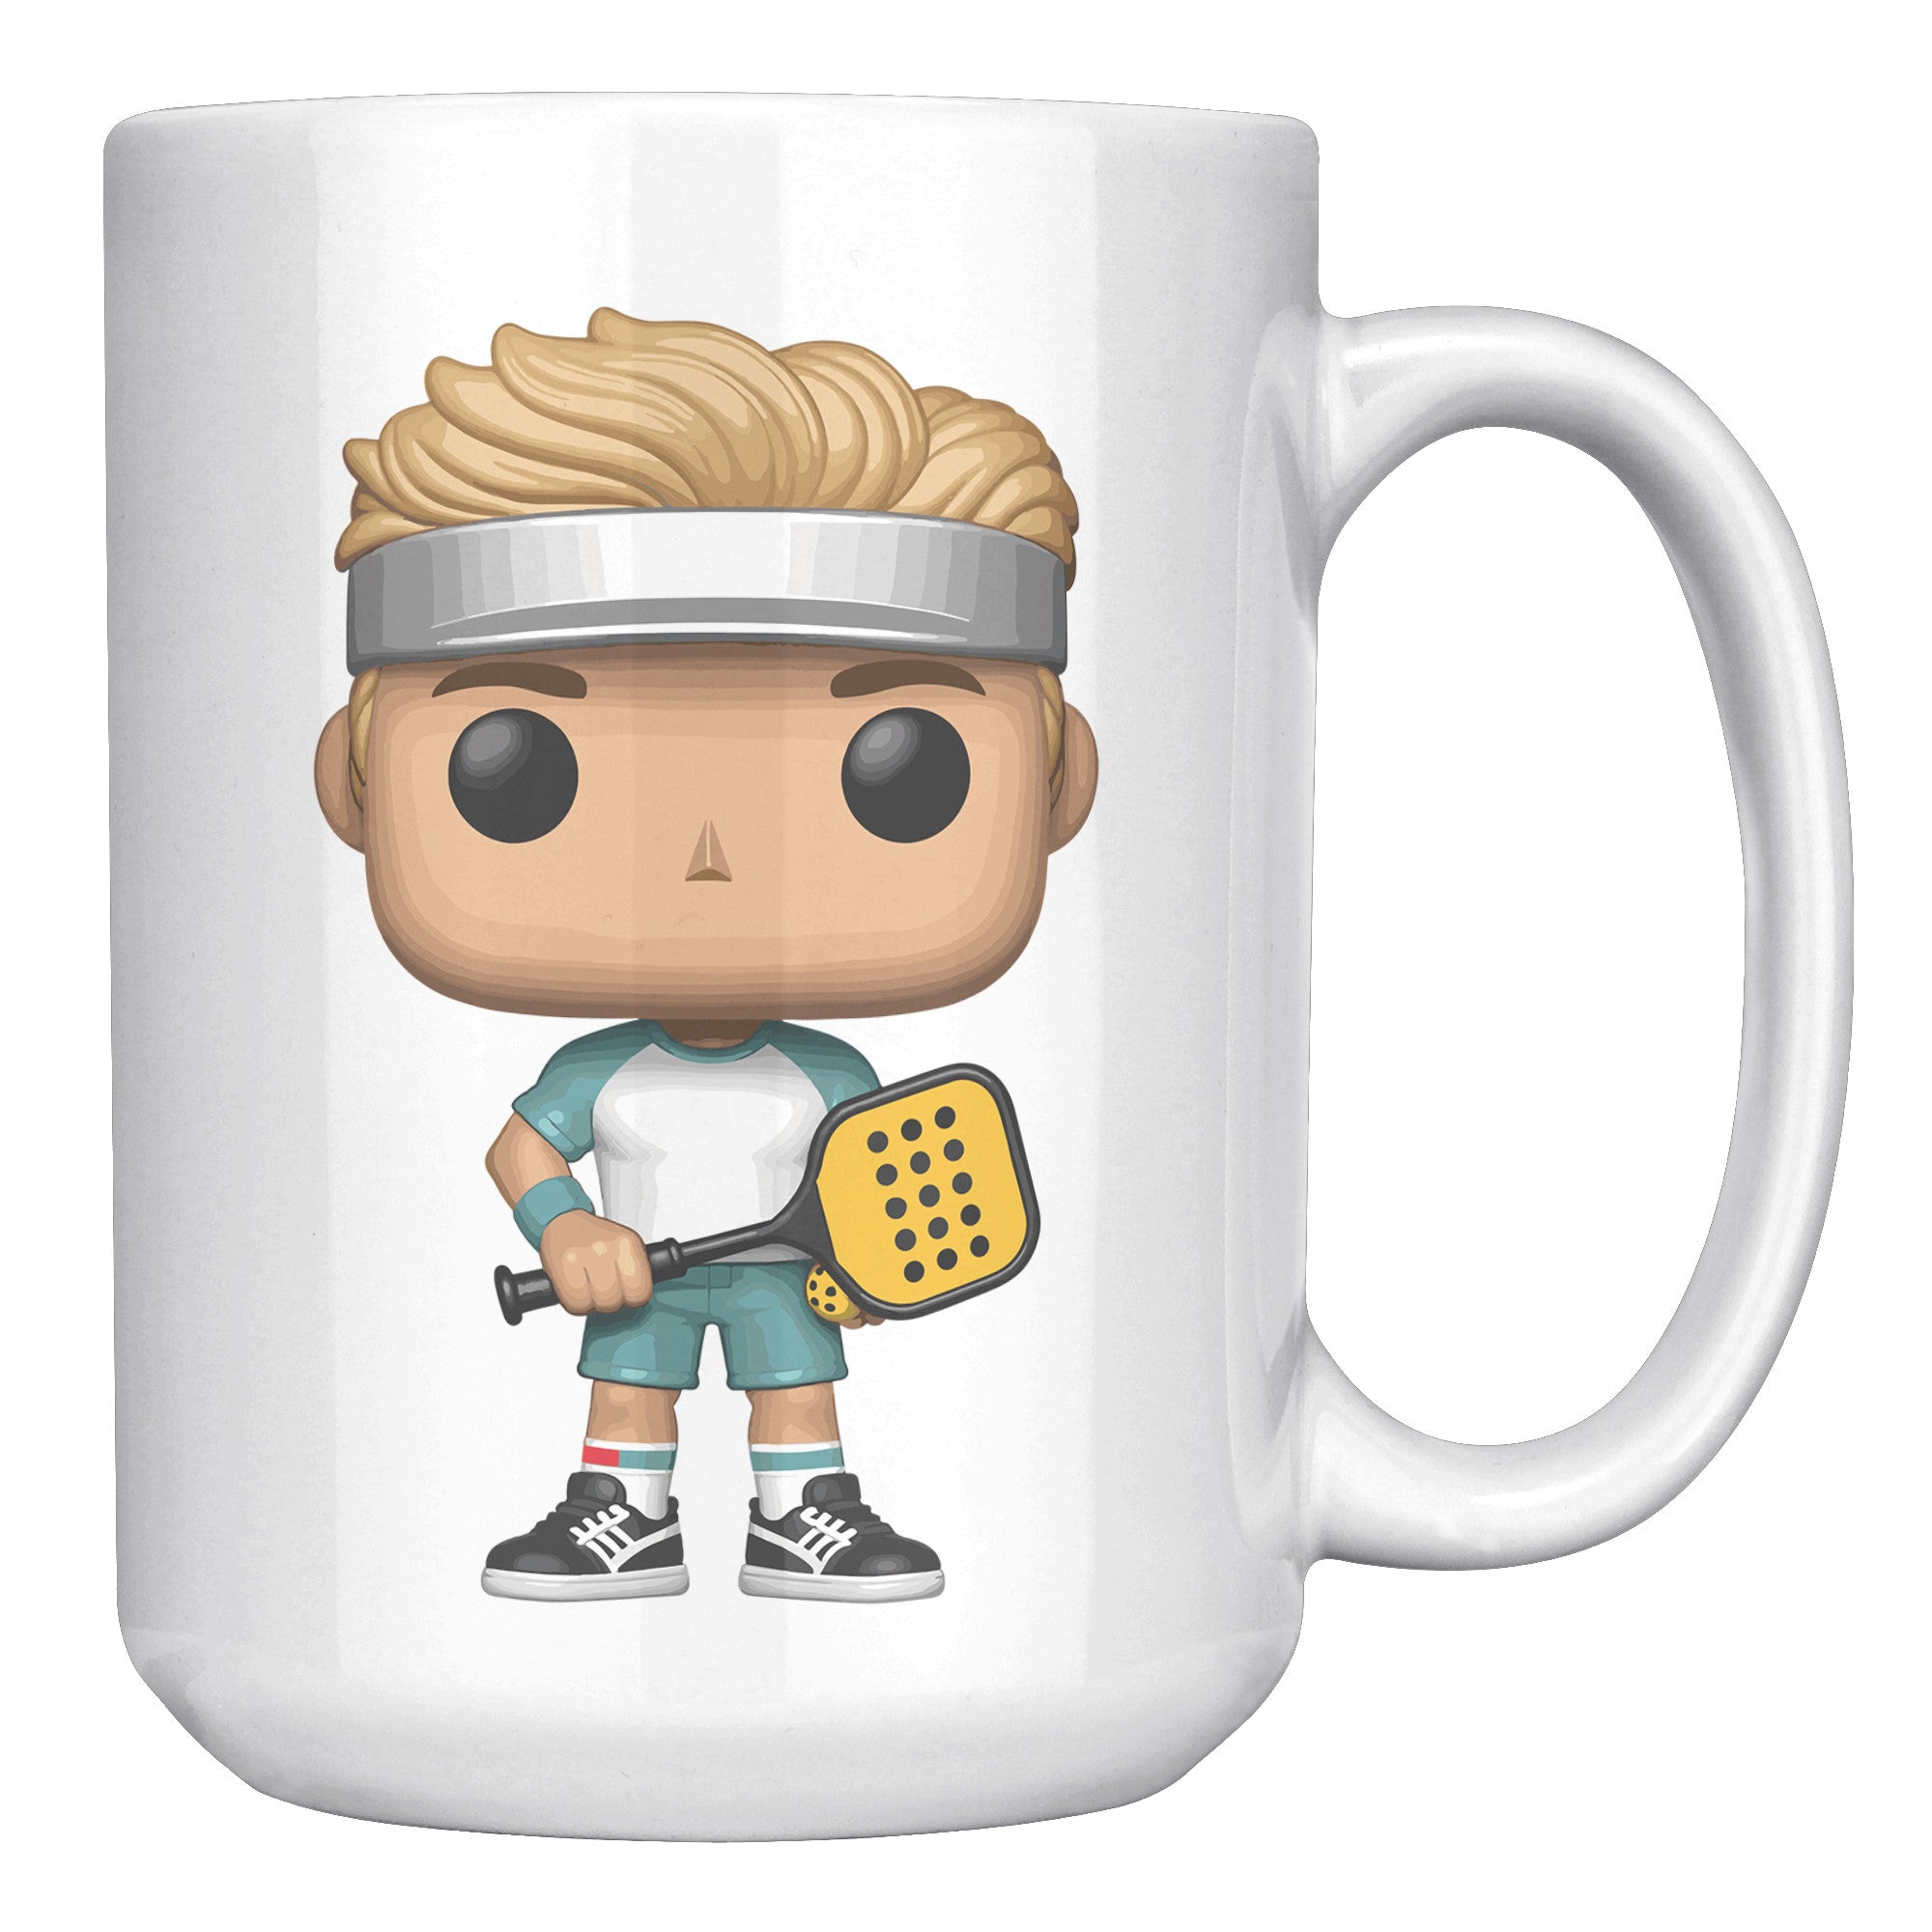 "Funko Pop Style Pickle Ball Player Boy Coffee Mug - Cute Athletic Cup - Perfect Gift for Pickle Ball Enthusiasts - Sporty Boy Apparel" - F1